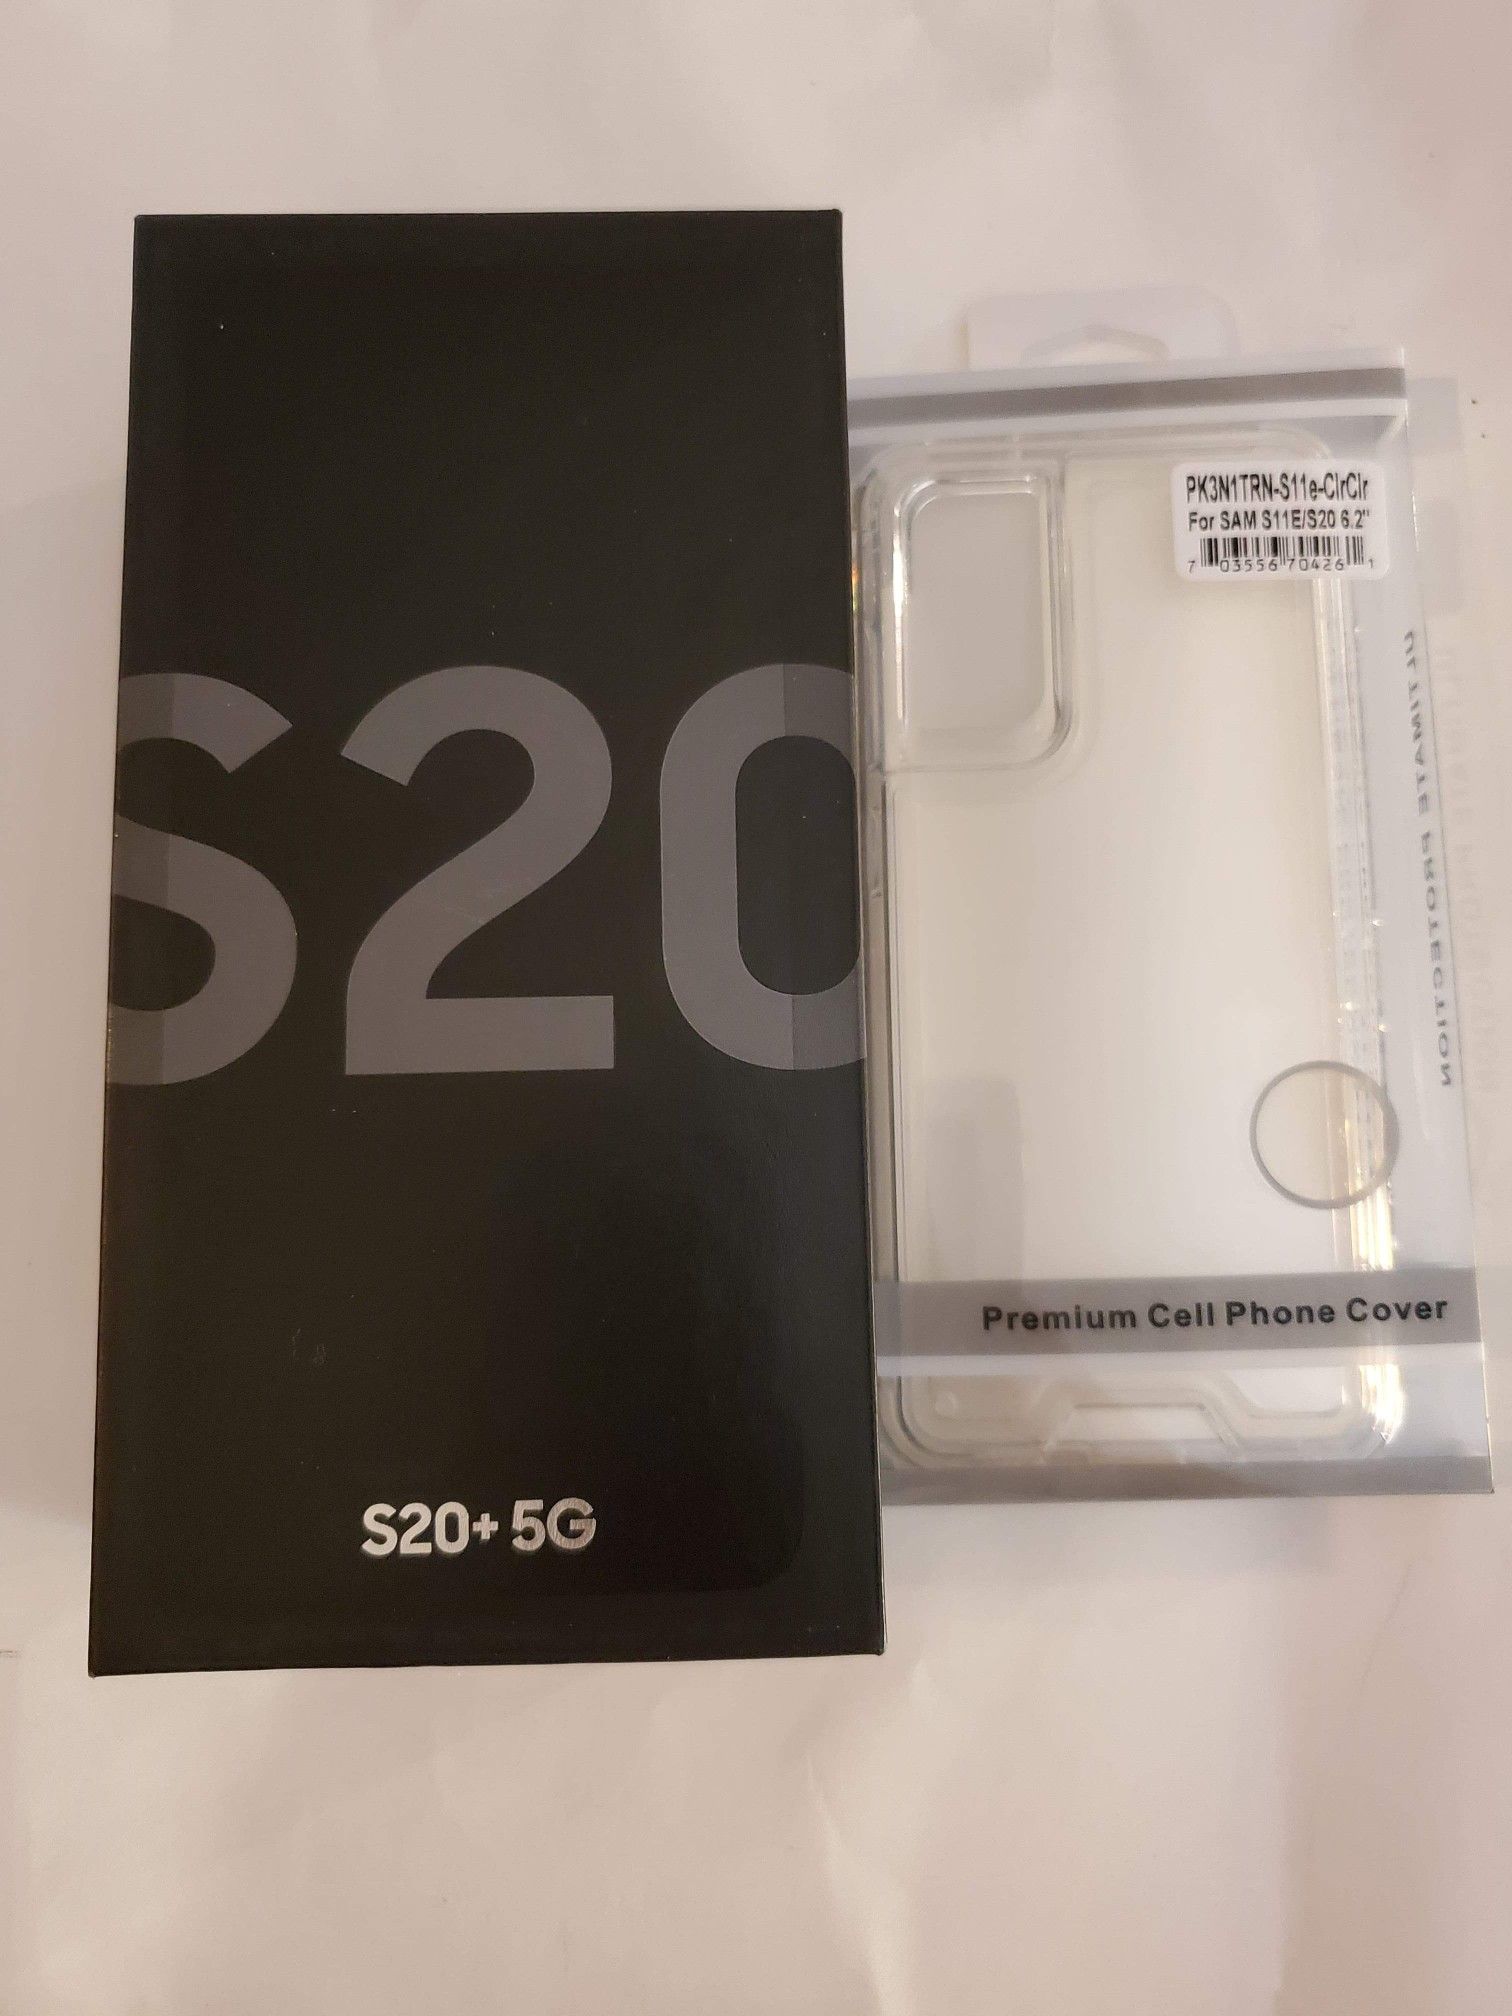 BRAND NEW SAMSUNG GALAXY S20 PLUS +5G FACTORY UNLOCKED (THESE PHONE ARE FACTORY UNLOCKED AND WILL WORK WITH ANY CARRIER IN THE WORLD)